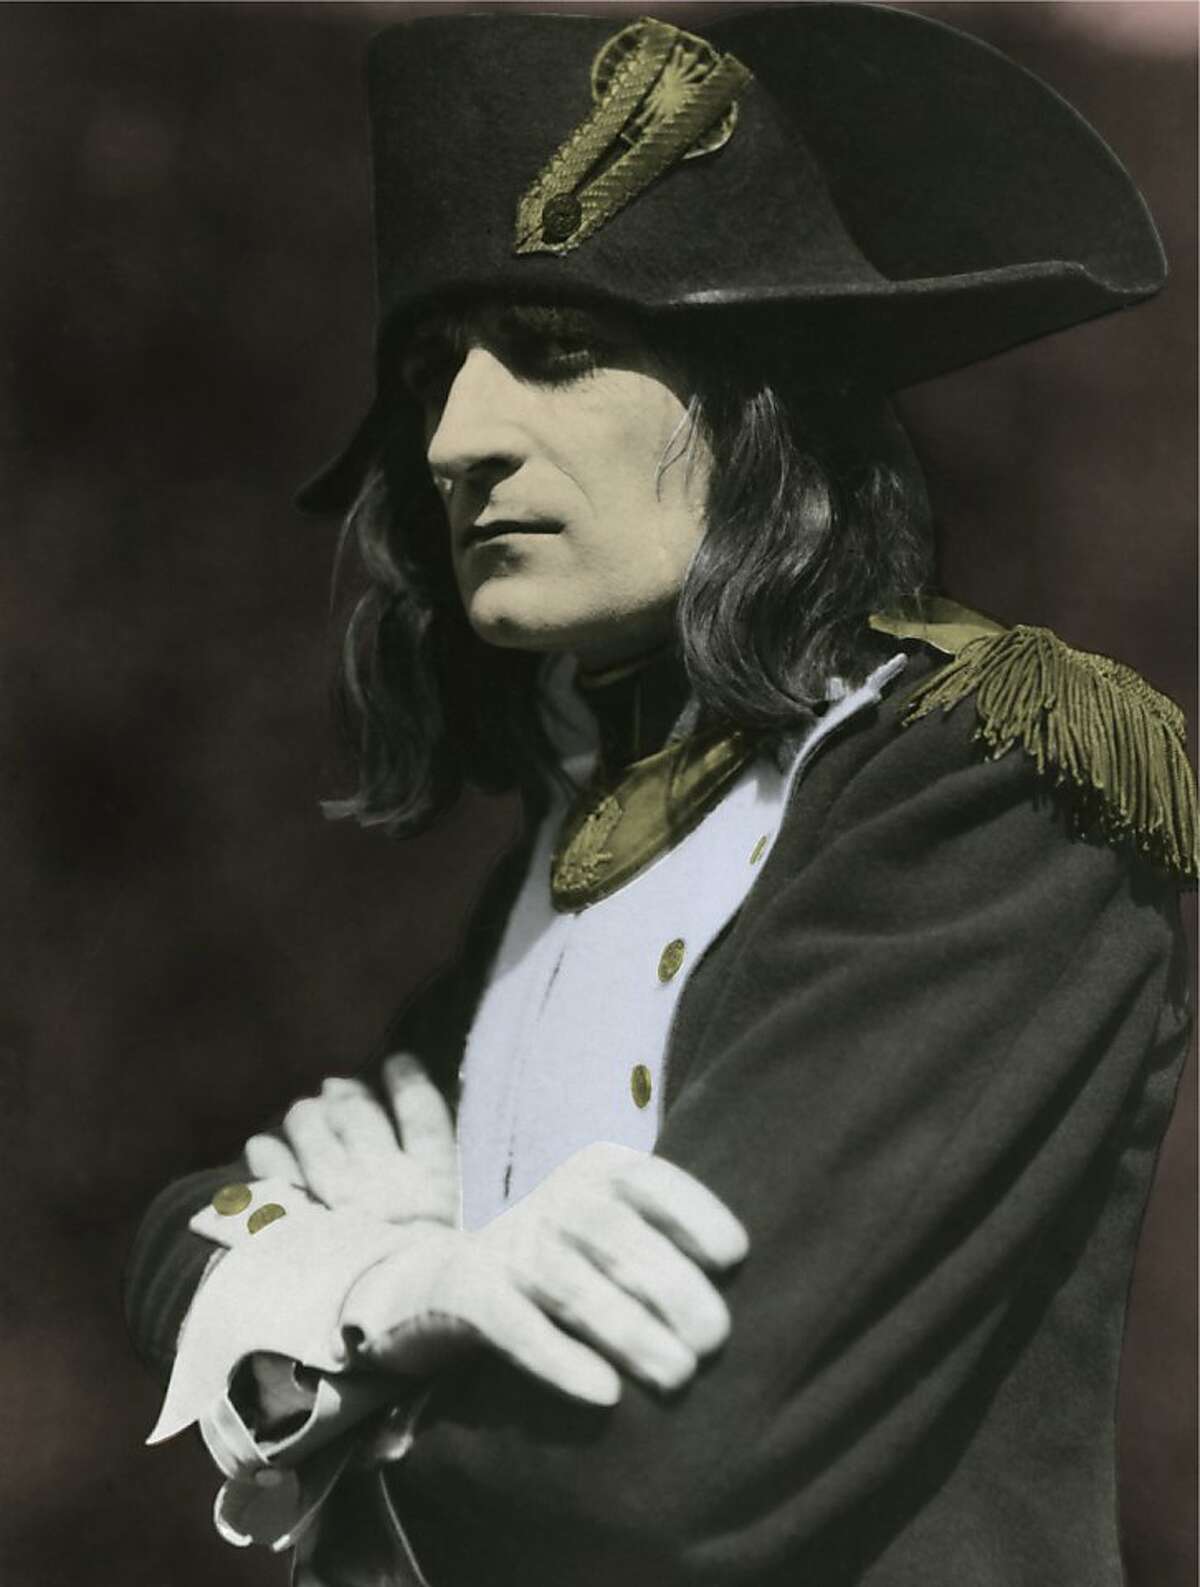 Albert DieudonnŽ in the title role of Abel GanceÕs legendary epic NAPOLEON. The San Francisco Silent Film Festival will present the U.S. premiere of Kevin BrownlowÕs complete restoration, accompanied by a live symphony score conducted by composer Carl Davis, at the Paramount Theatre, Oakland, in spring 2012.